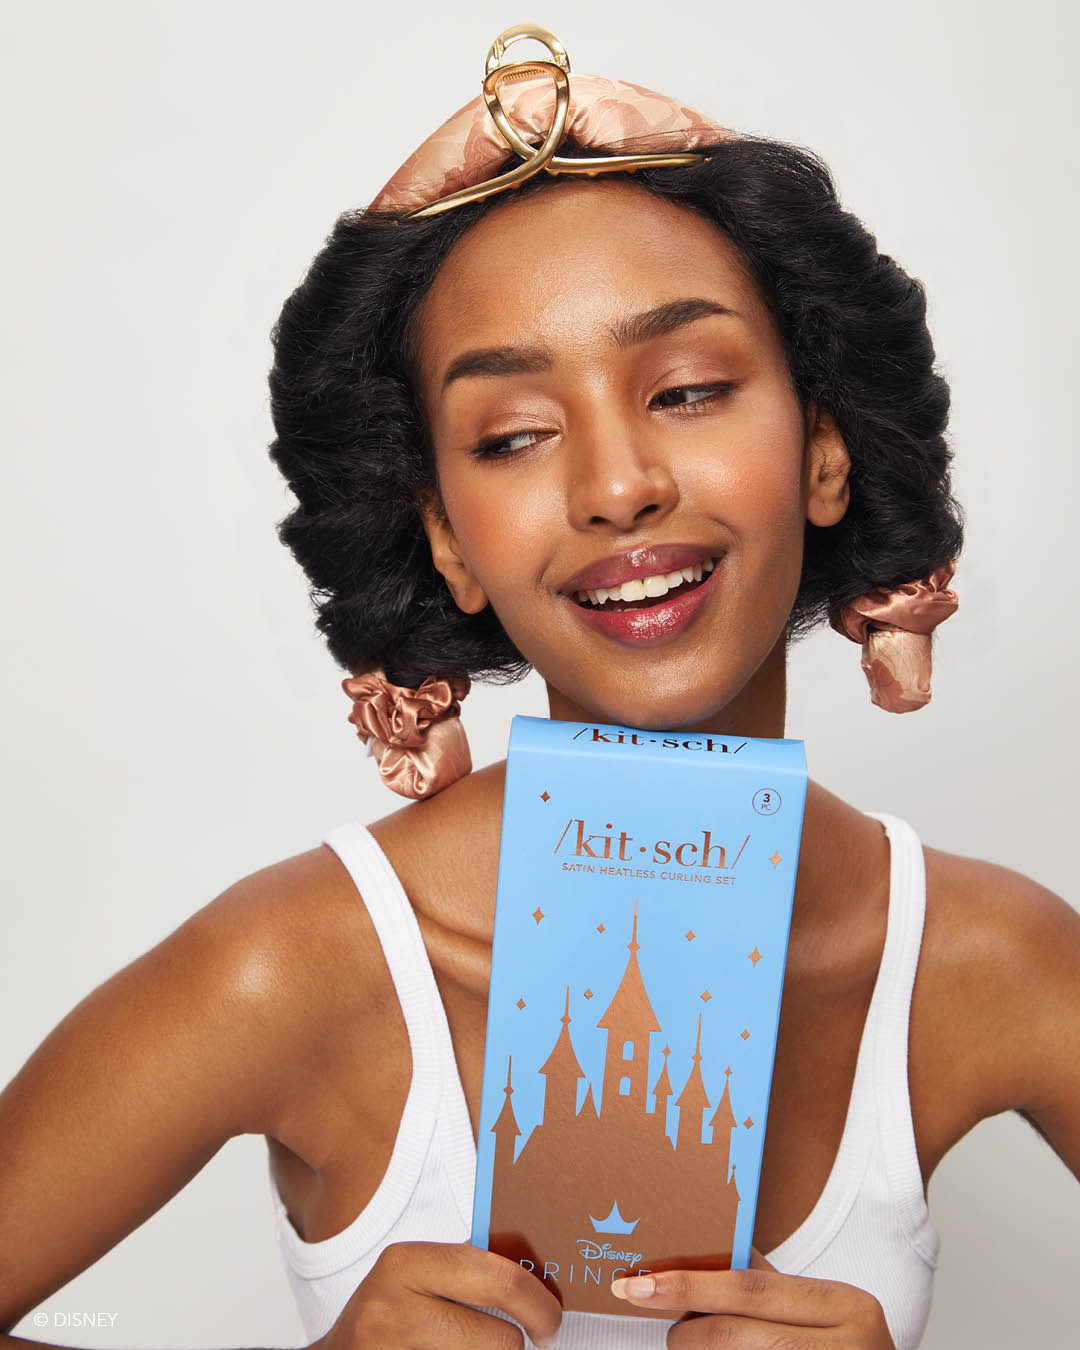 Cyber Monday Sales to Help Restock Your Curly Hair Products